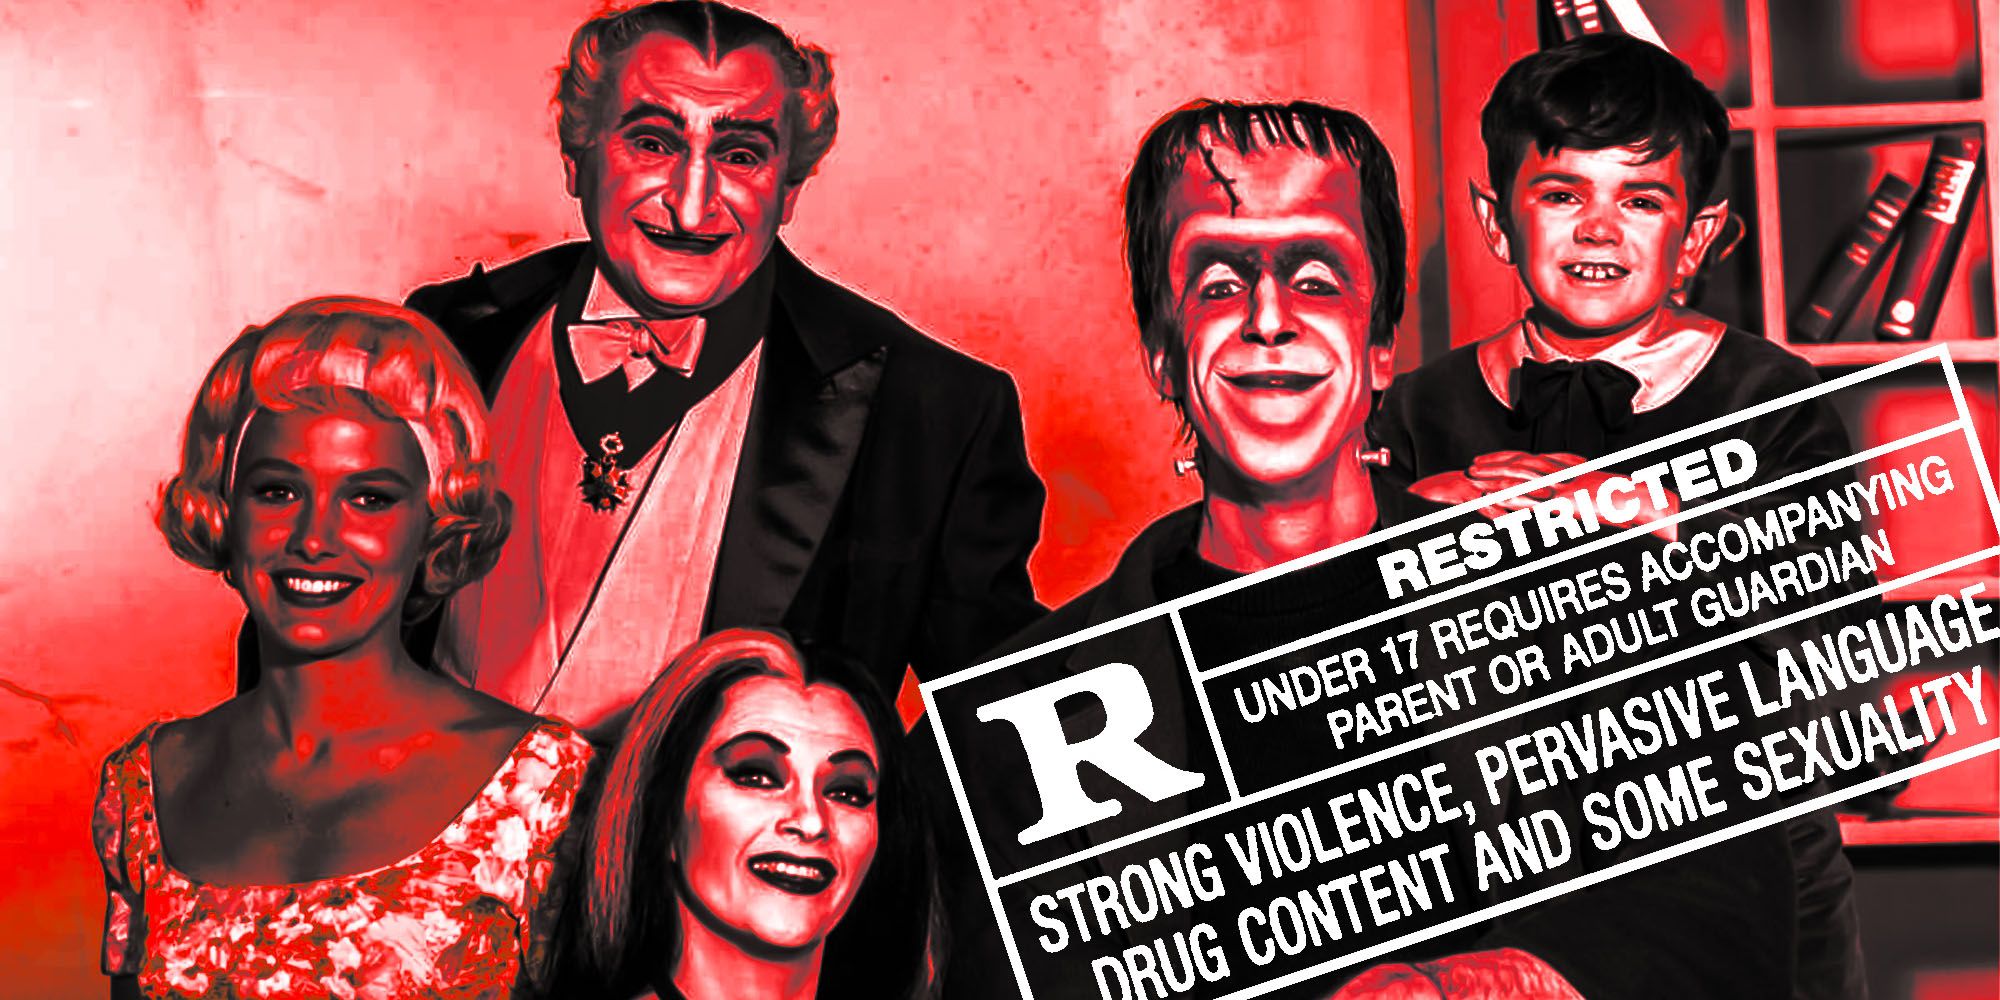 The munsters reboot Rated R